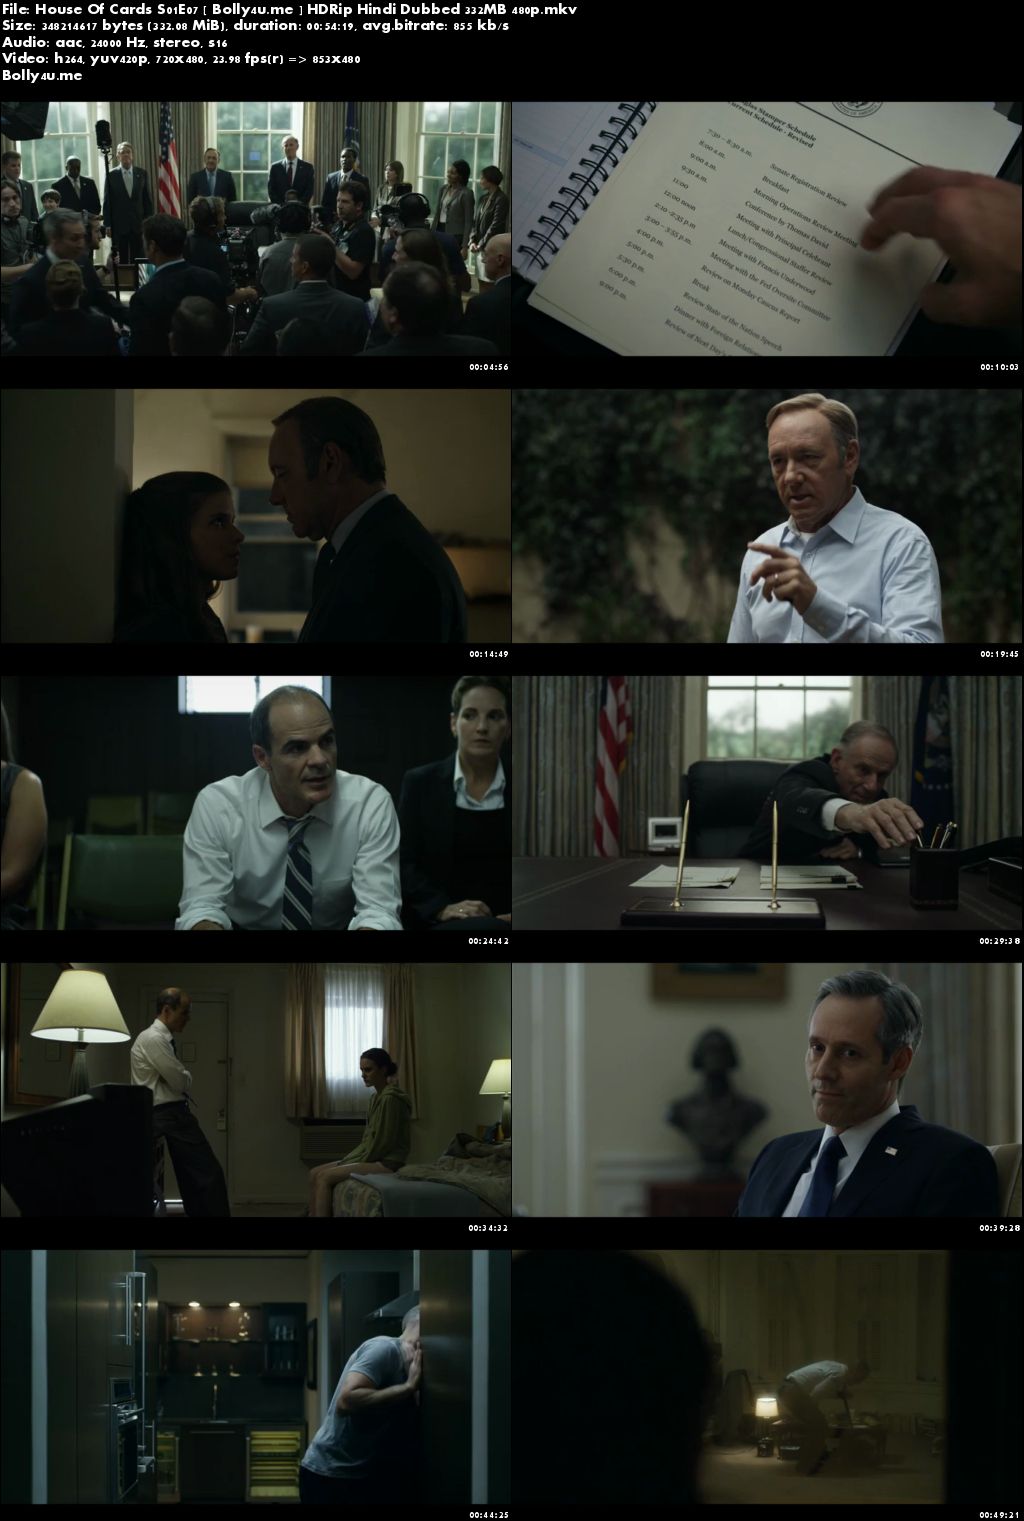 House Of Cards S01E07 HDRip 300MB Hindi Dubbed 480p Download